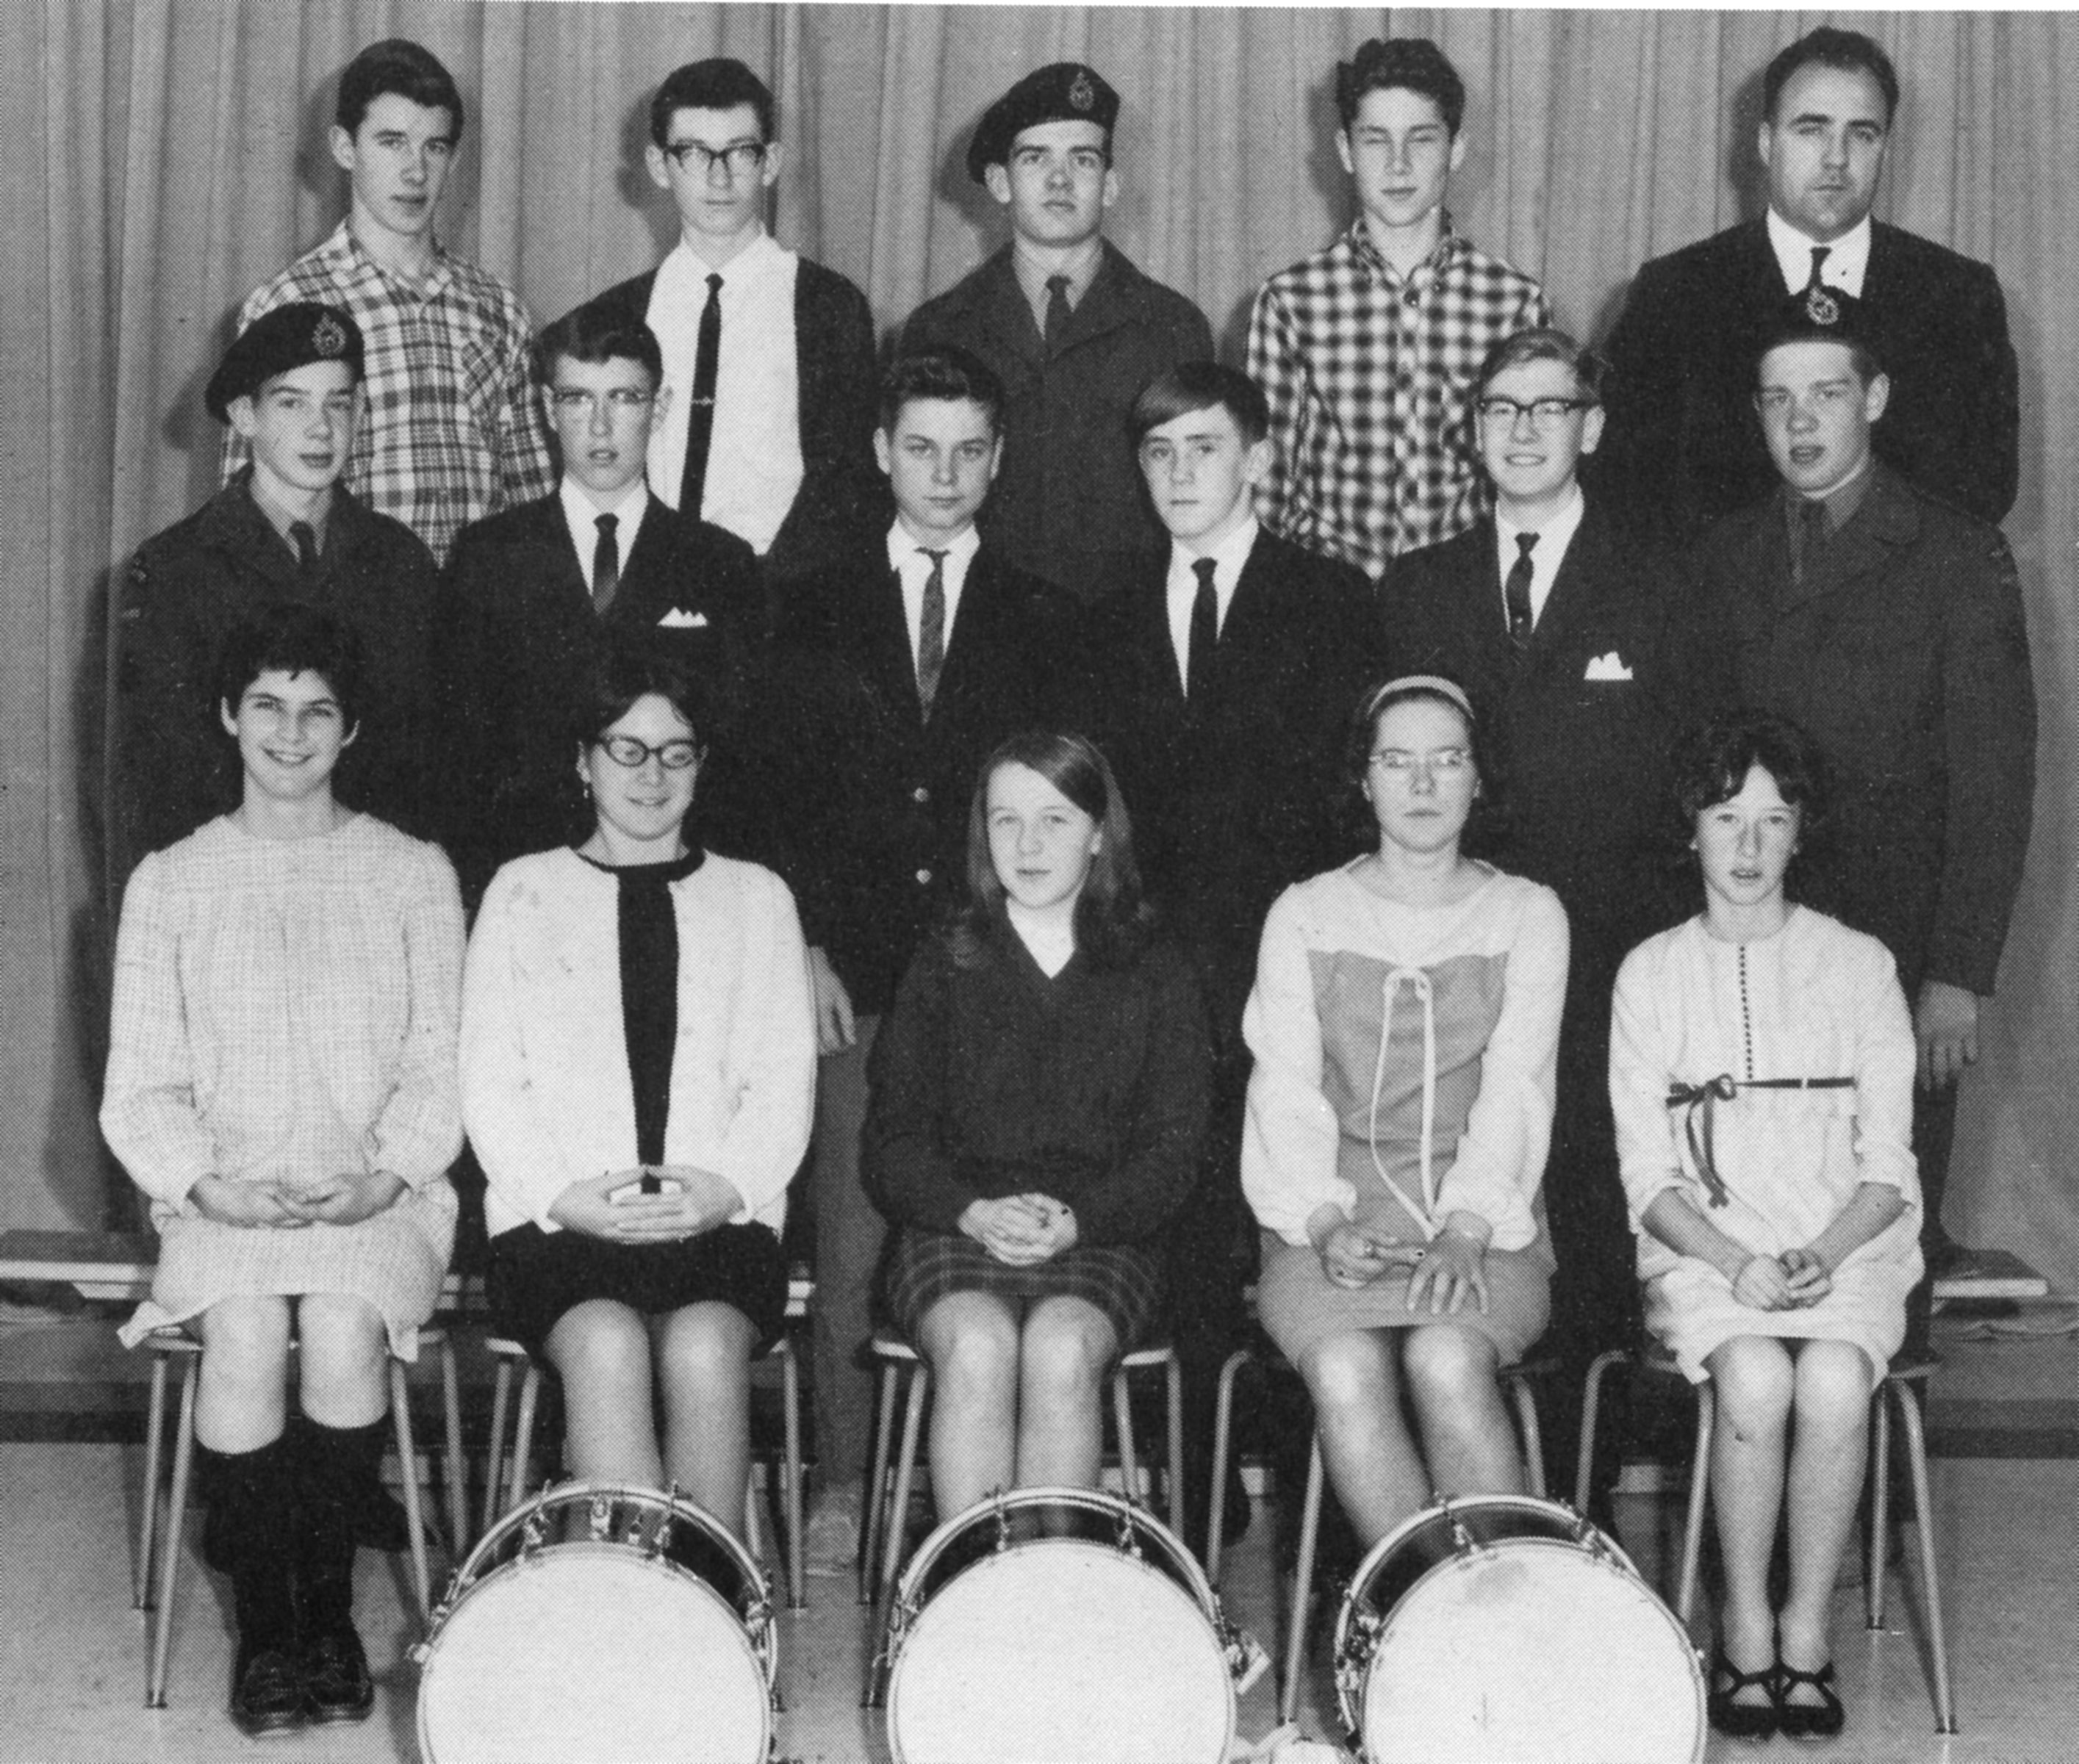 (Click to magnify) FRONT ROW: B. Bookham, B. Brunne, C. Hall, Mary Jane Hackner, S. Grimshaw; ***SECOND ROW: G. Elford, R. Boose, L. Mercier, D. Gibbons, B. Rodd, Keith Elford; ***BACK ROW: T. Rice, S. Diltz, G. Elford, D. Olding, Mr. Ray Newton.